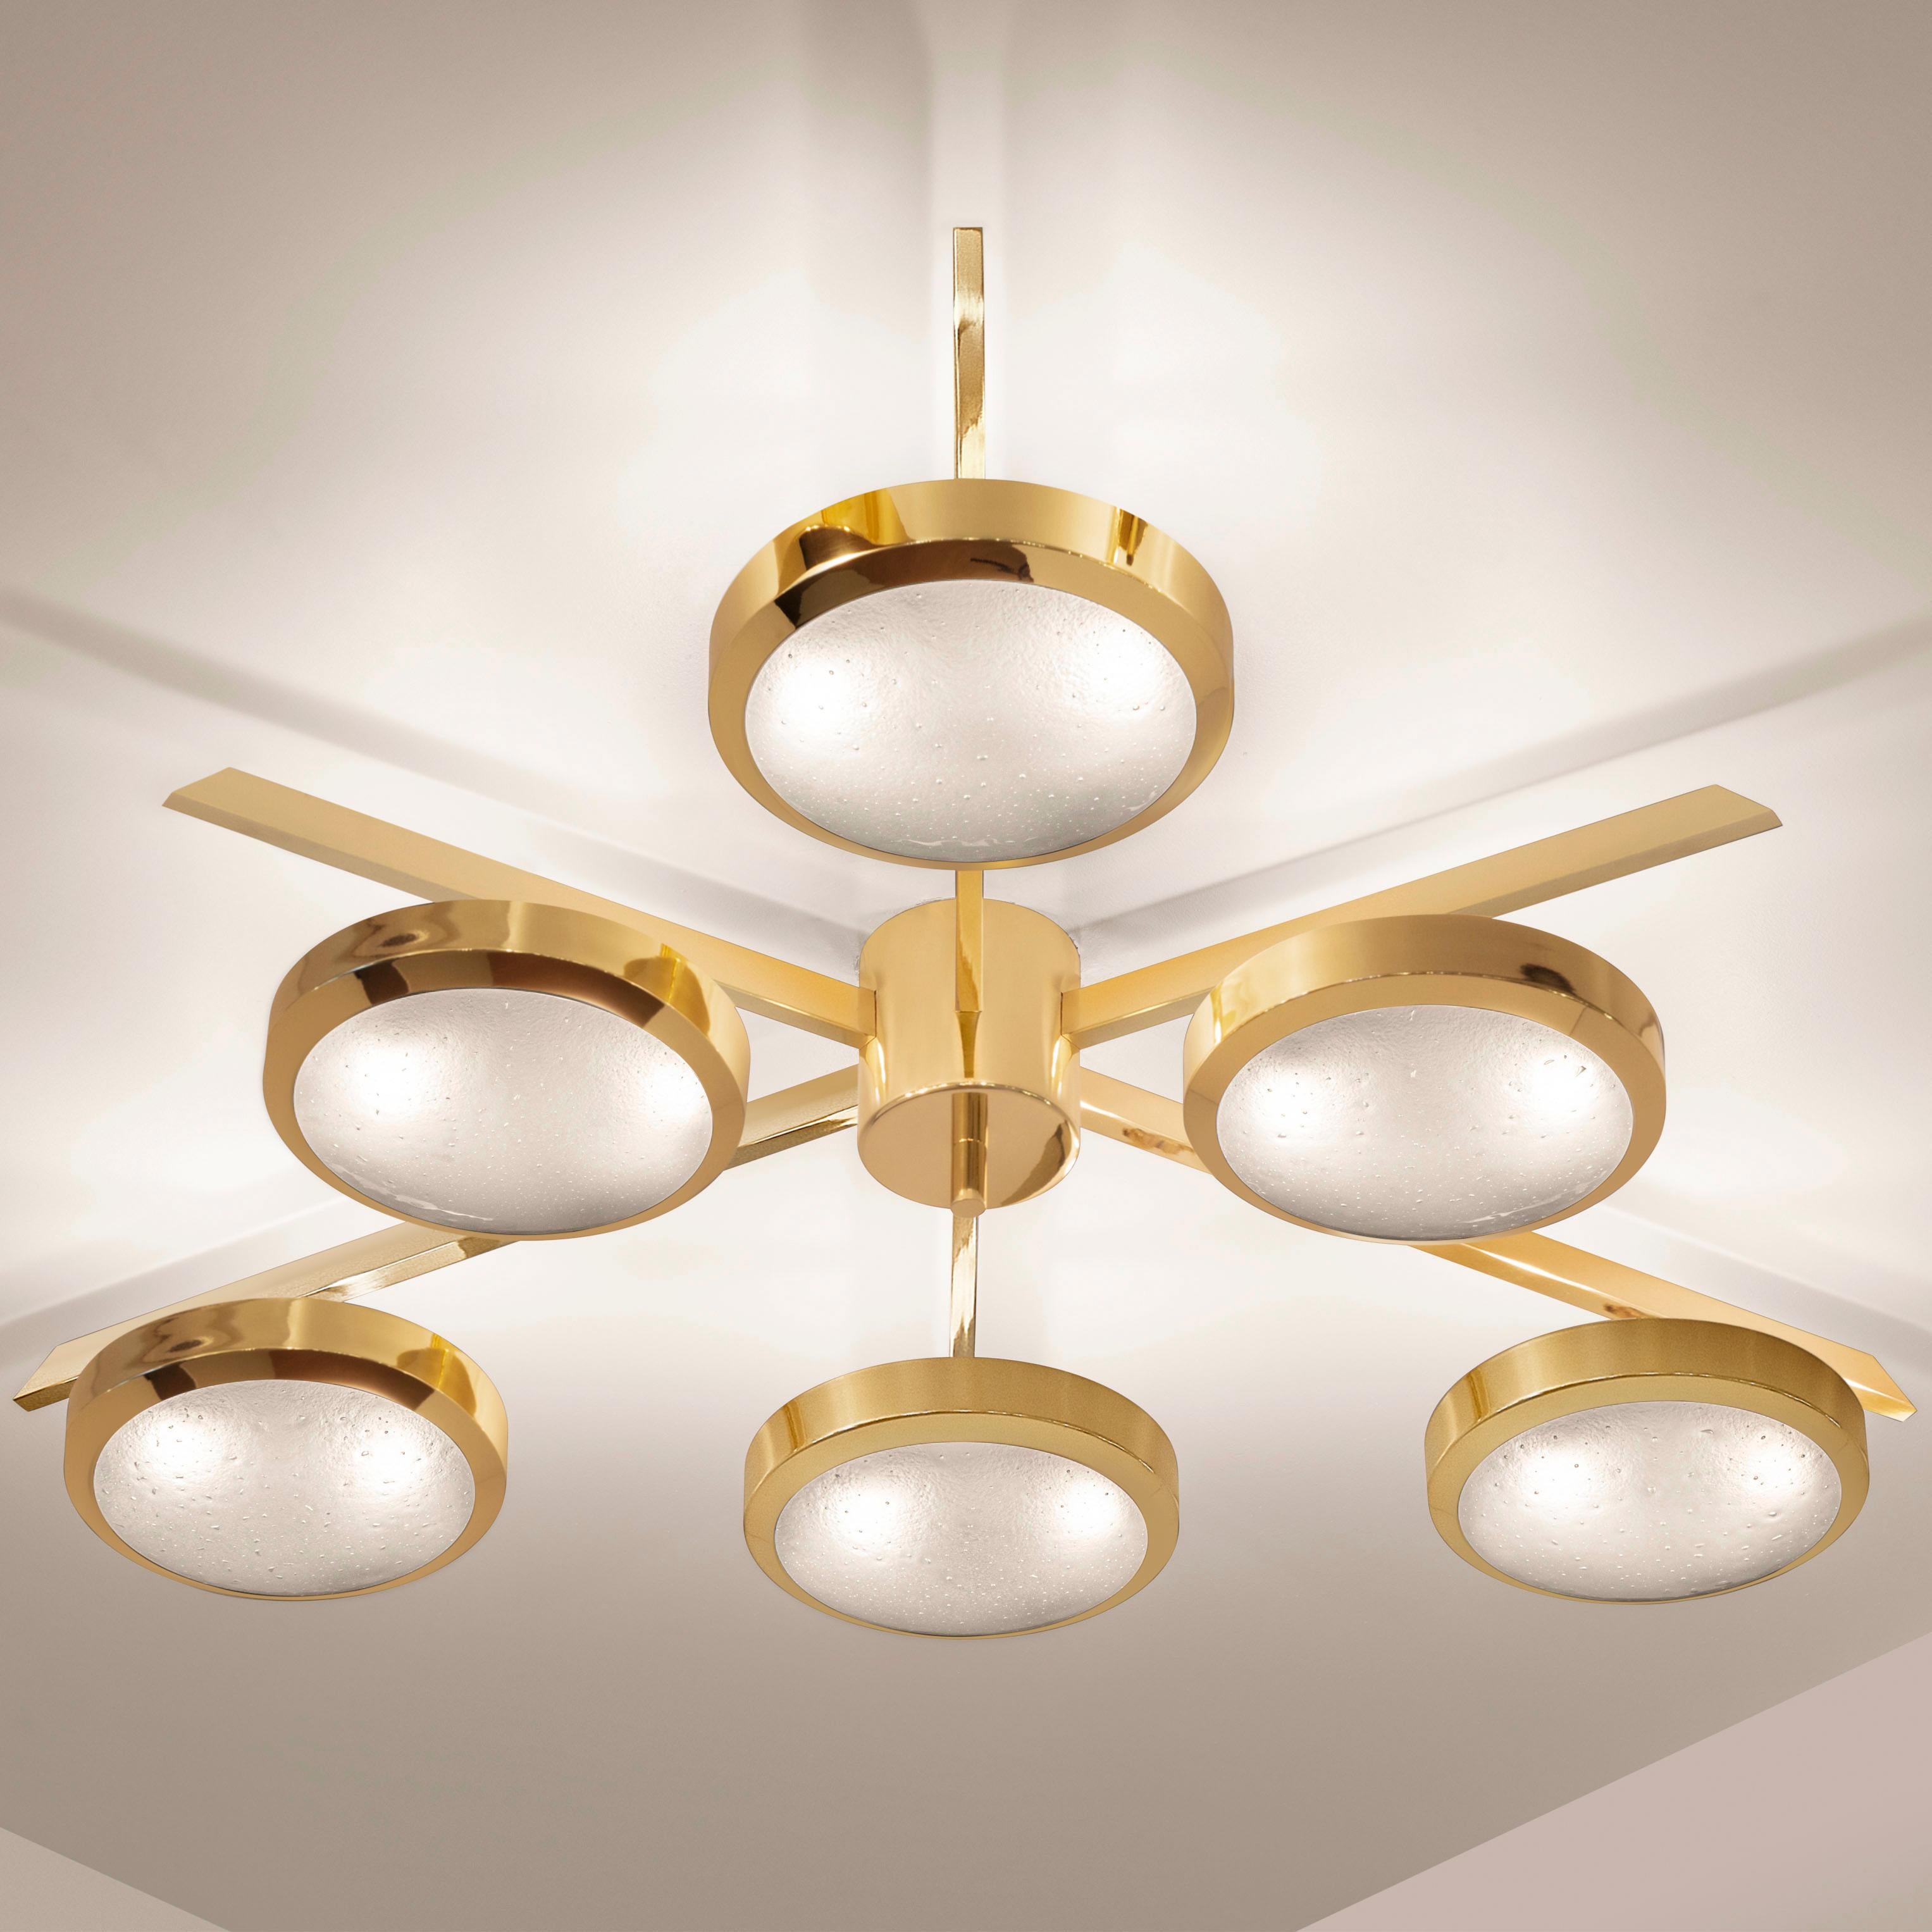 Italian Sei Ceiling Light by Gaspare Asaro - Polished Nickel Finish For Sale